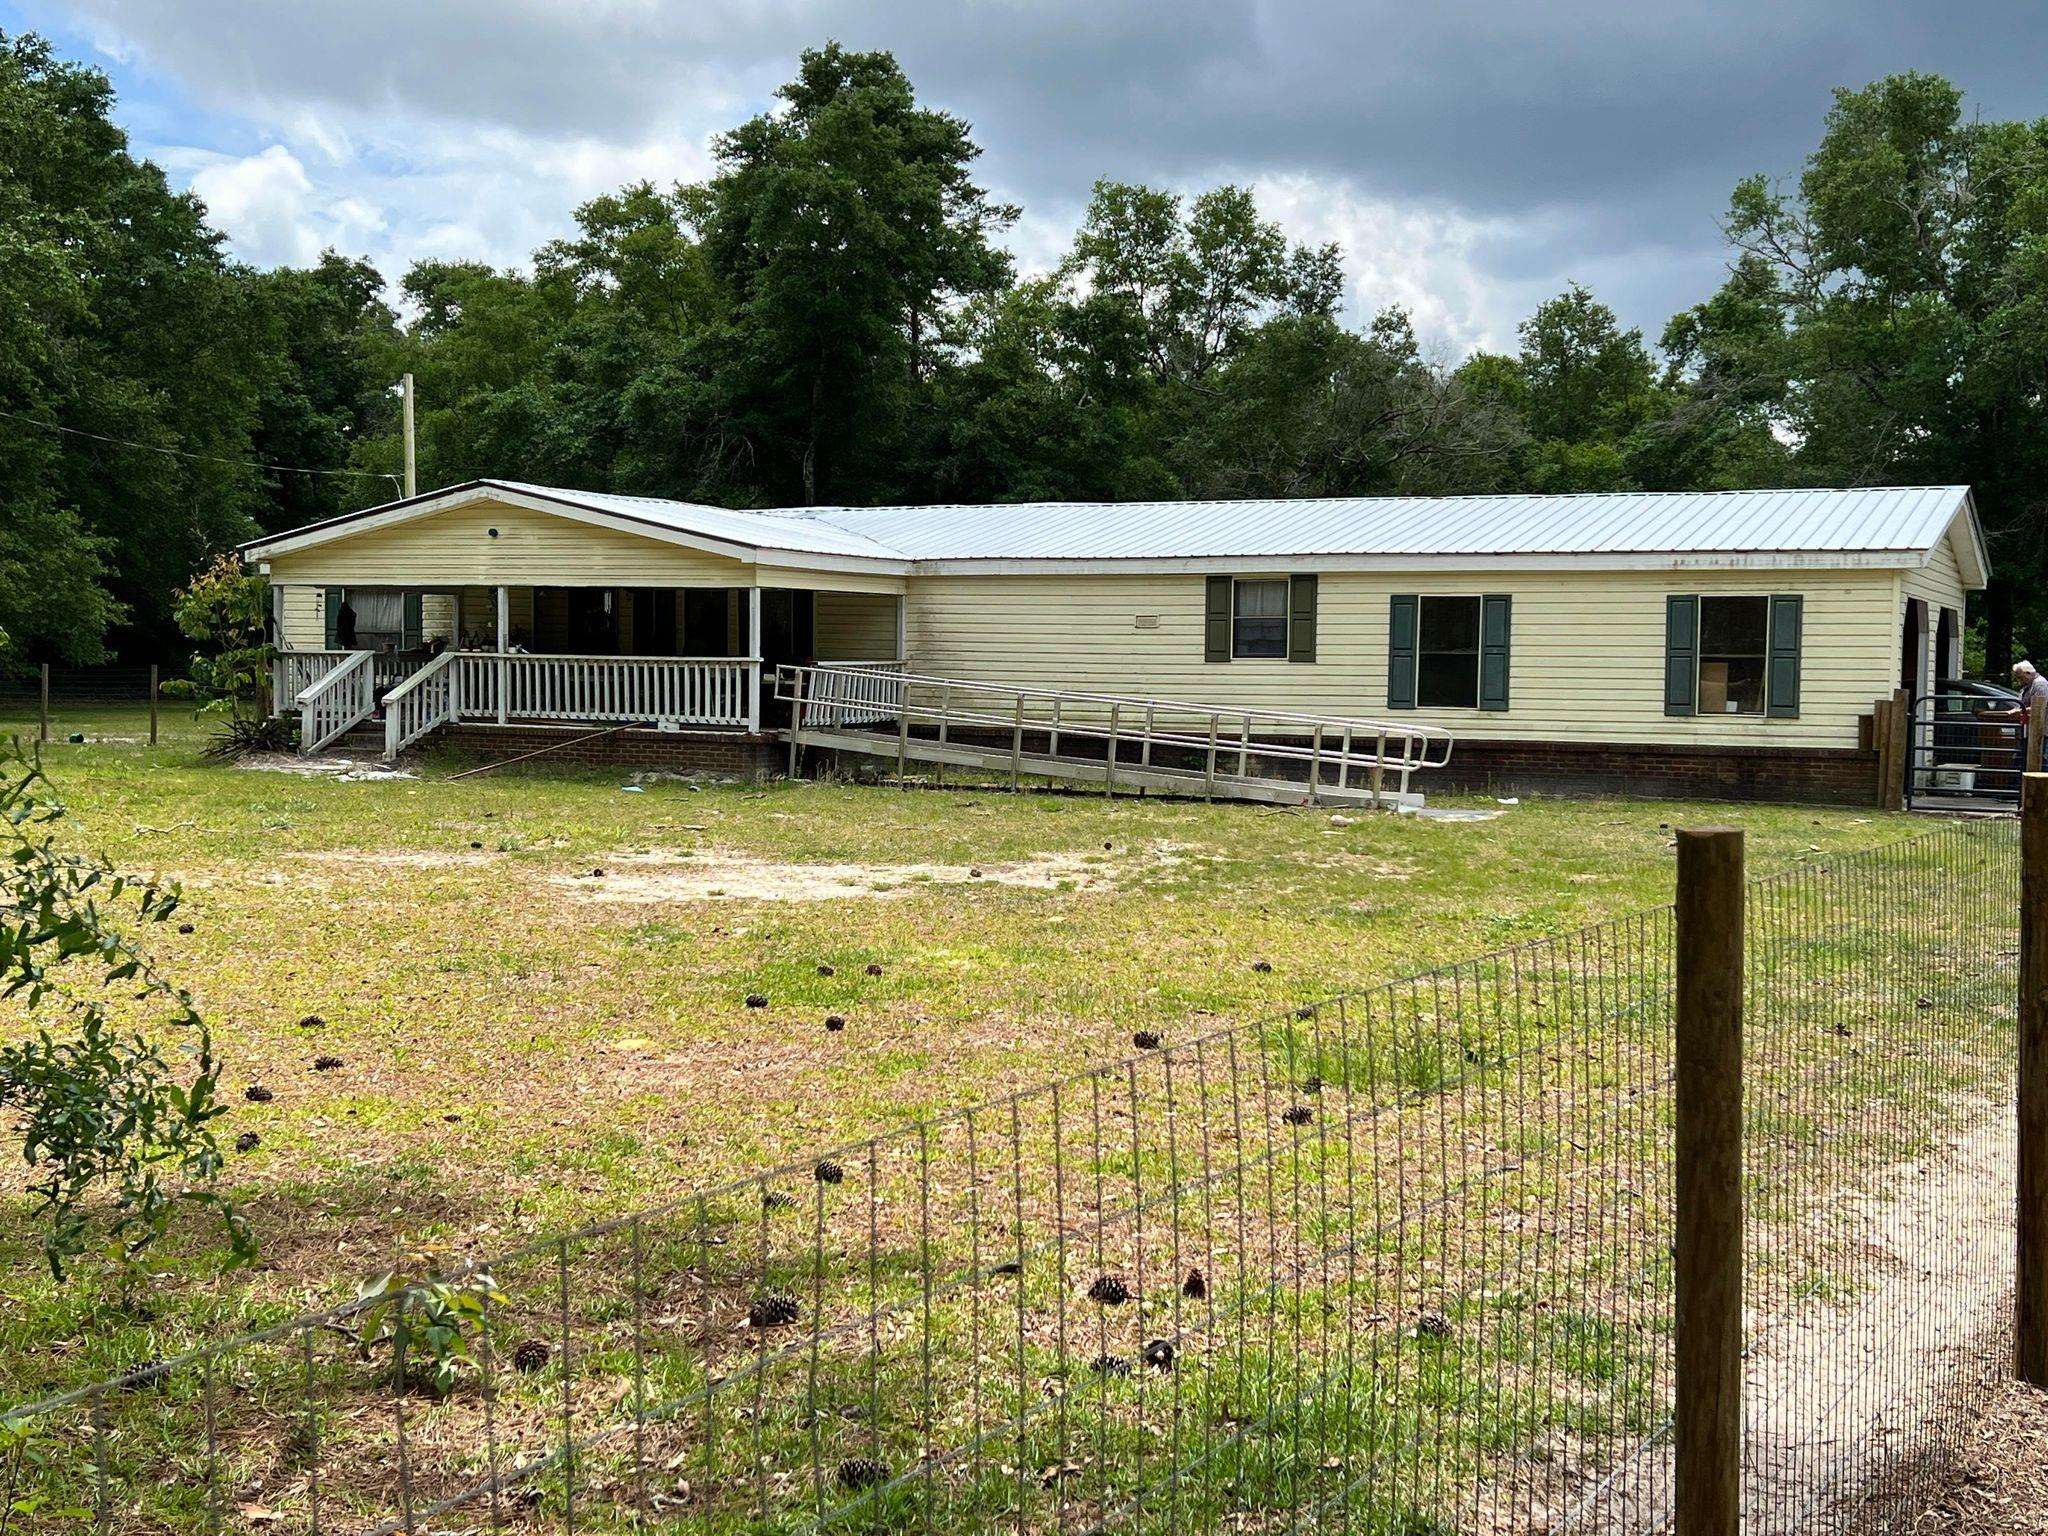 Large double-wide mobile home located on Old Federal Road in Gadsden County.  4+ acres, 2 bedroom, 2 bath.  One room was converted into a sitting room but could easily be converted back to a 3rd bedroom.  2 carport attached garage.  Floors have recently been replaced, 20-21 AC, 20-21 metal roof, 20-21 septic tank & drain field.  Front yard recently fenced.  Front & back porches for peaceful porch sitting and serenity on stressful days. Home is in need of TLC, but would make a great property!